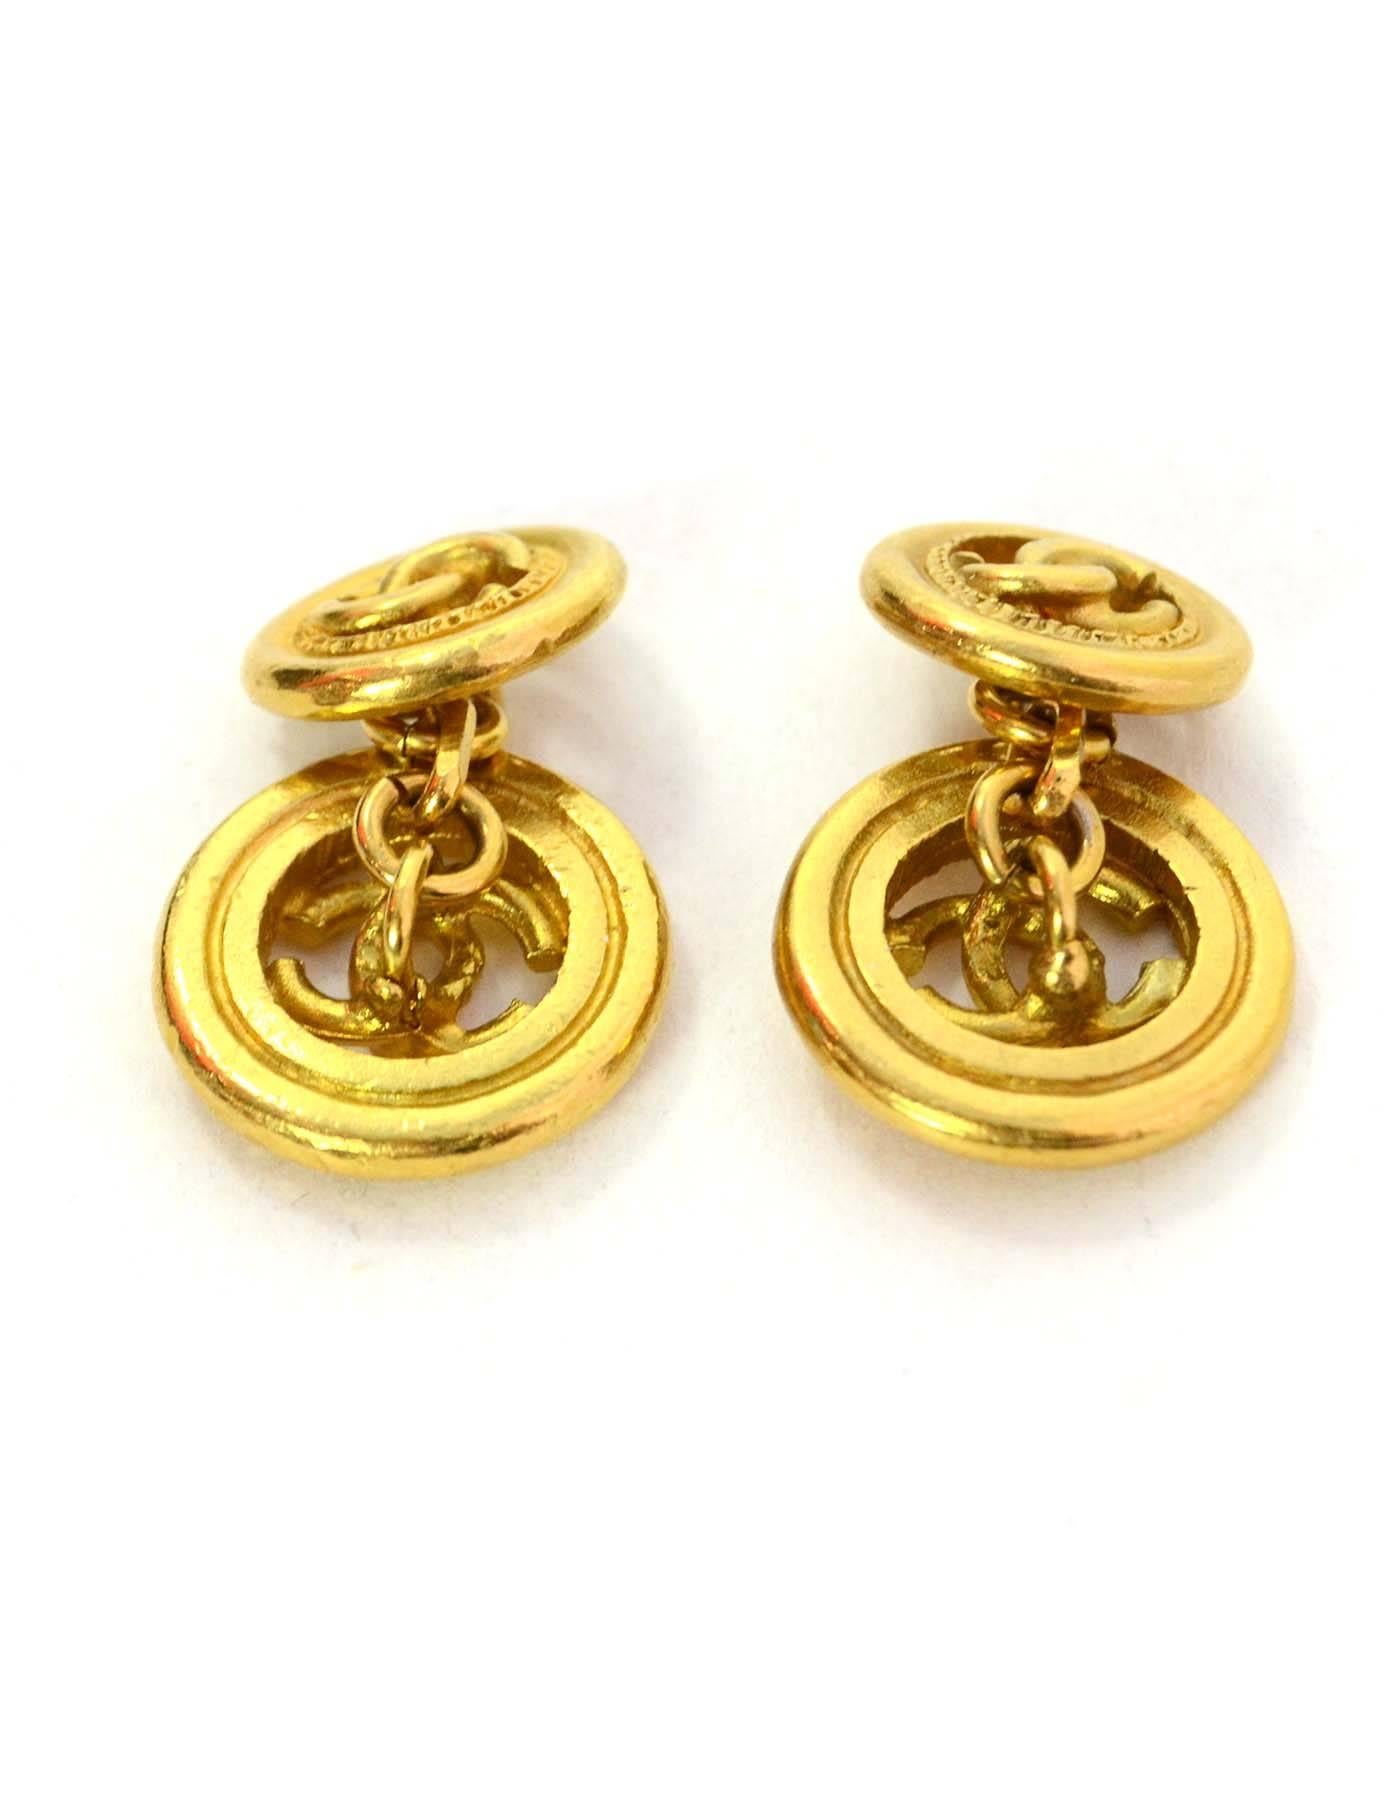 Chanel Gold CC Cufflinks
Color: Goldtone
Materials: Metal
Overall Condition: Excellent pre-owned condition
Measurements: 
Length: .75